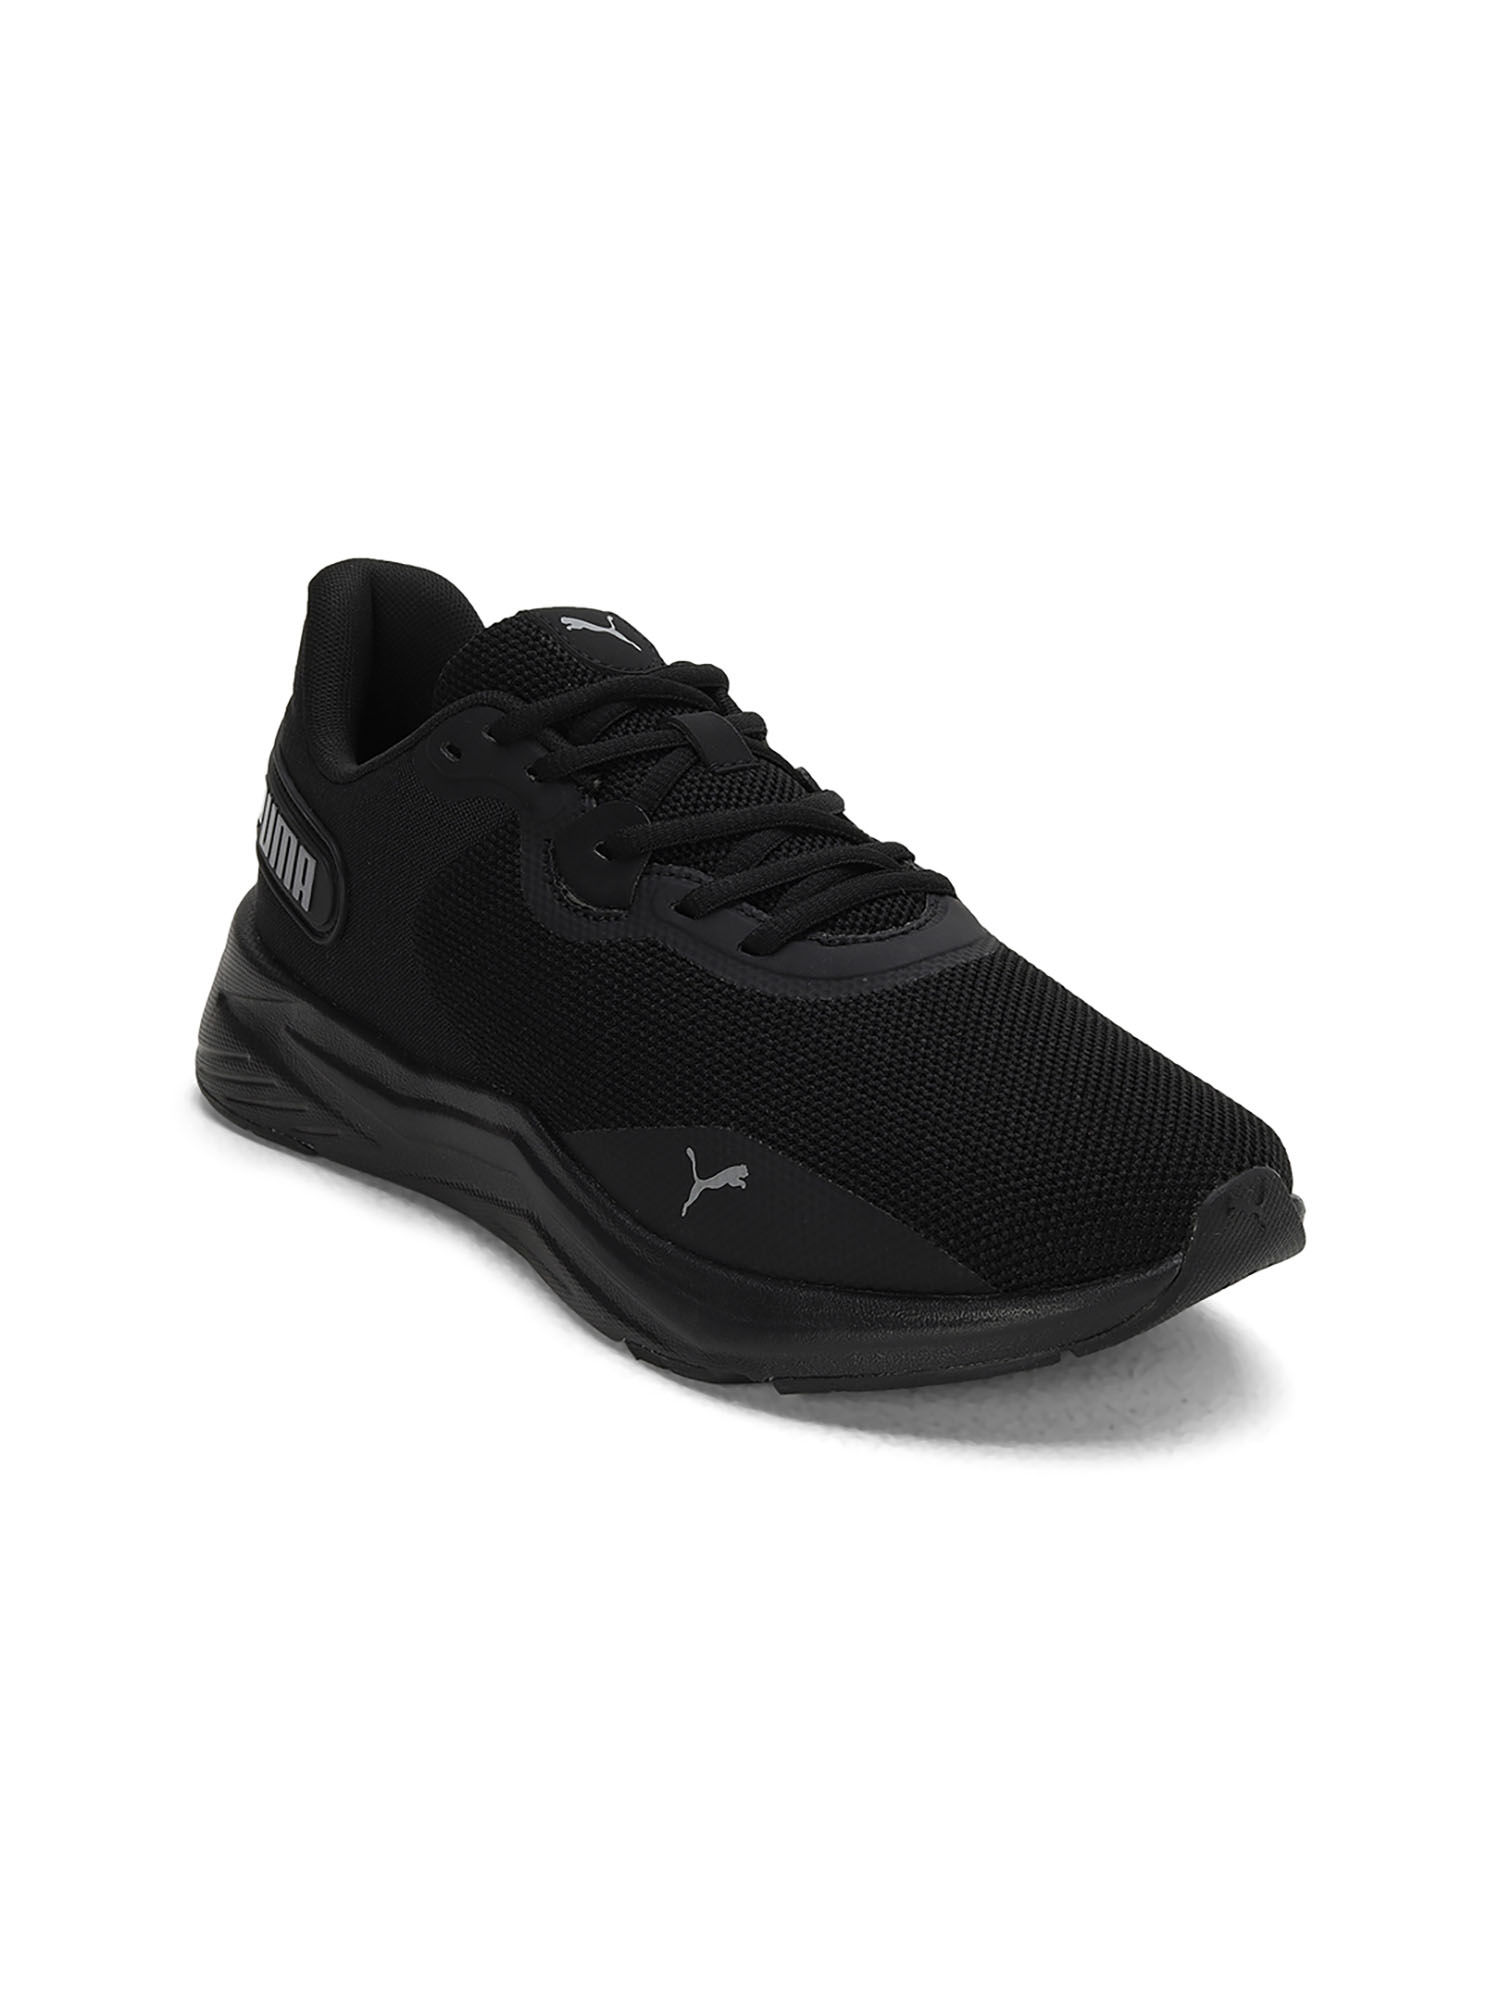 PUMA Puma sports shoes unisex 23 autumn and winter new trendy new year sports  shoes light